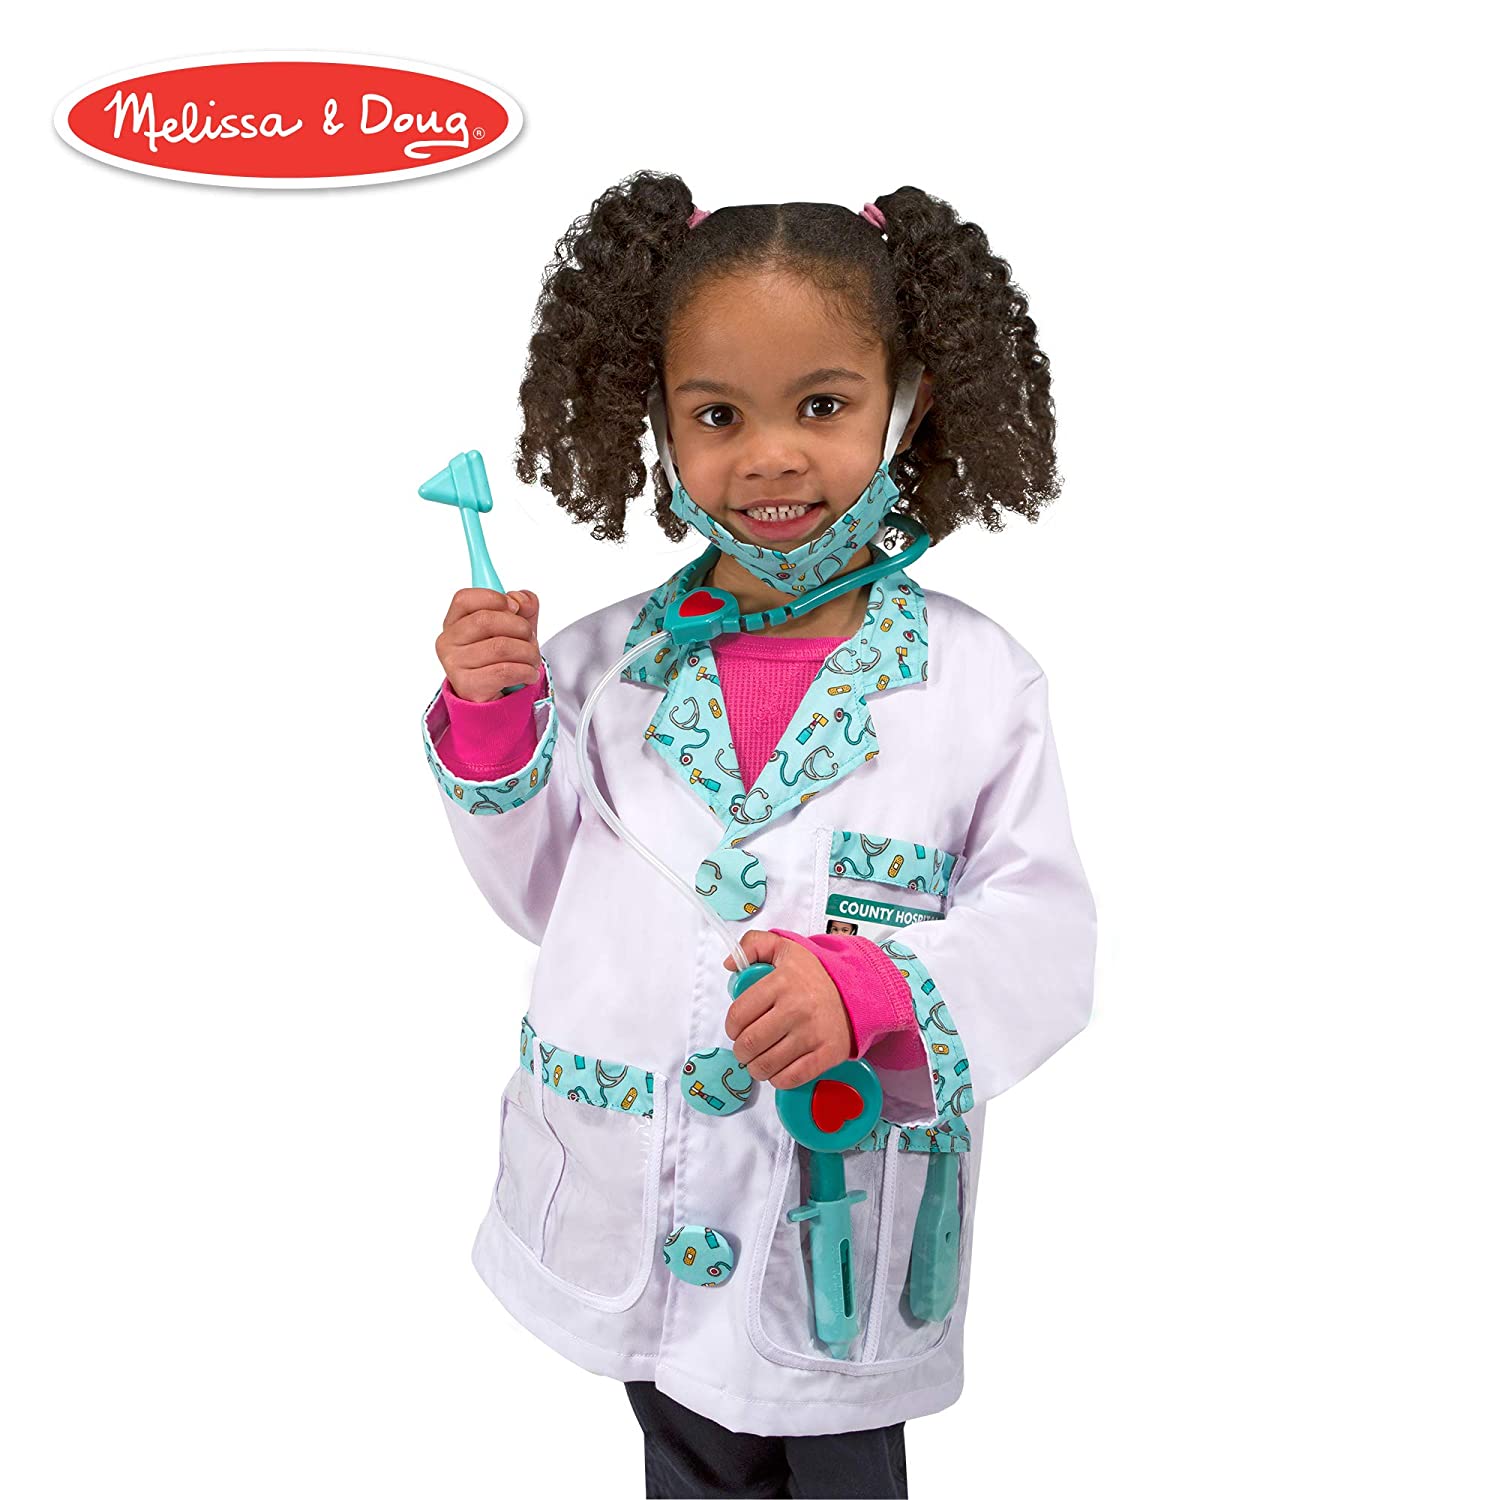 Top 9 Best Toy Doctor Kits Reviews in 2023 2